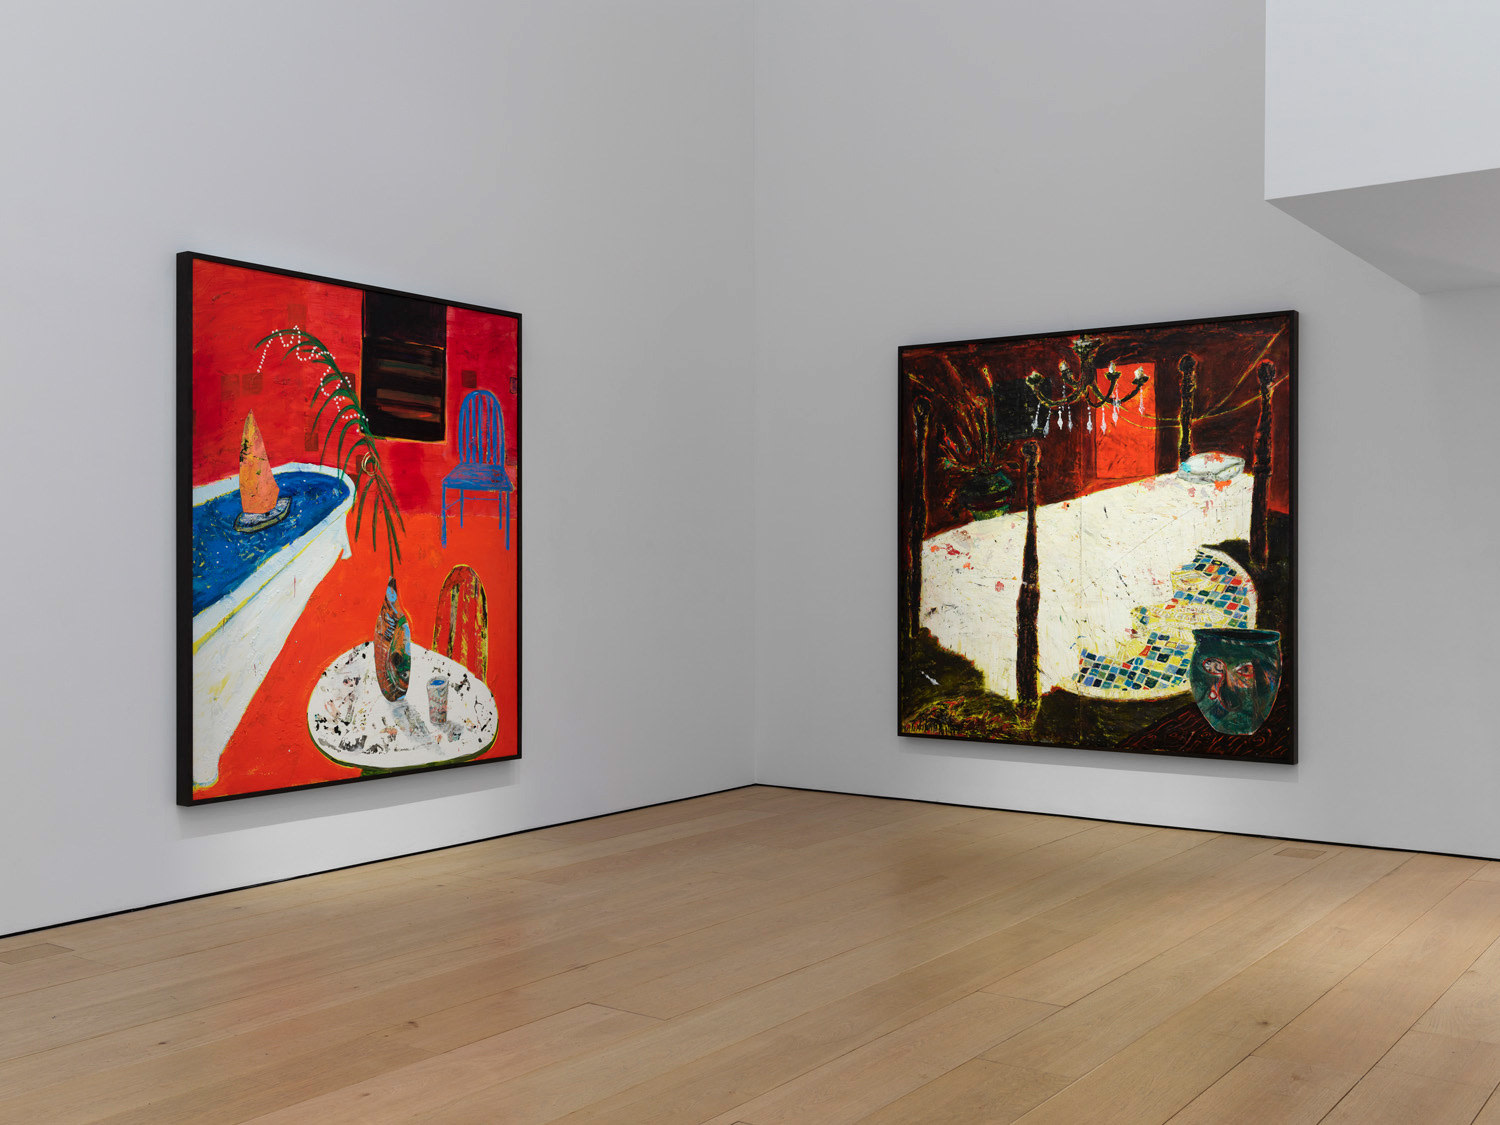 Eighth installation view of the exhibition Angel Otero: The Fortune of Having Been There at Lehmann Maupin in New York